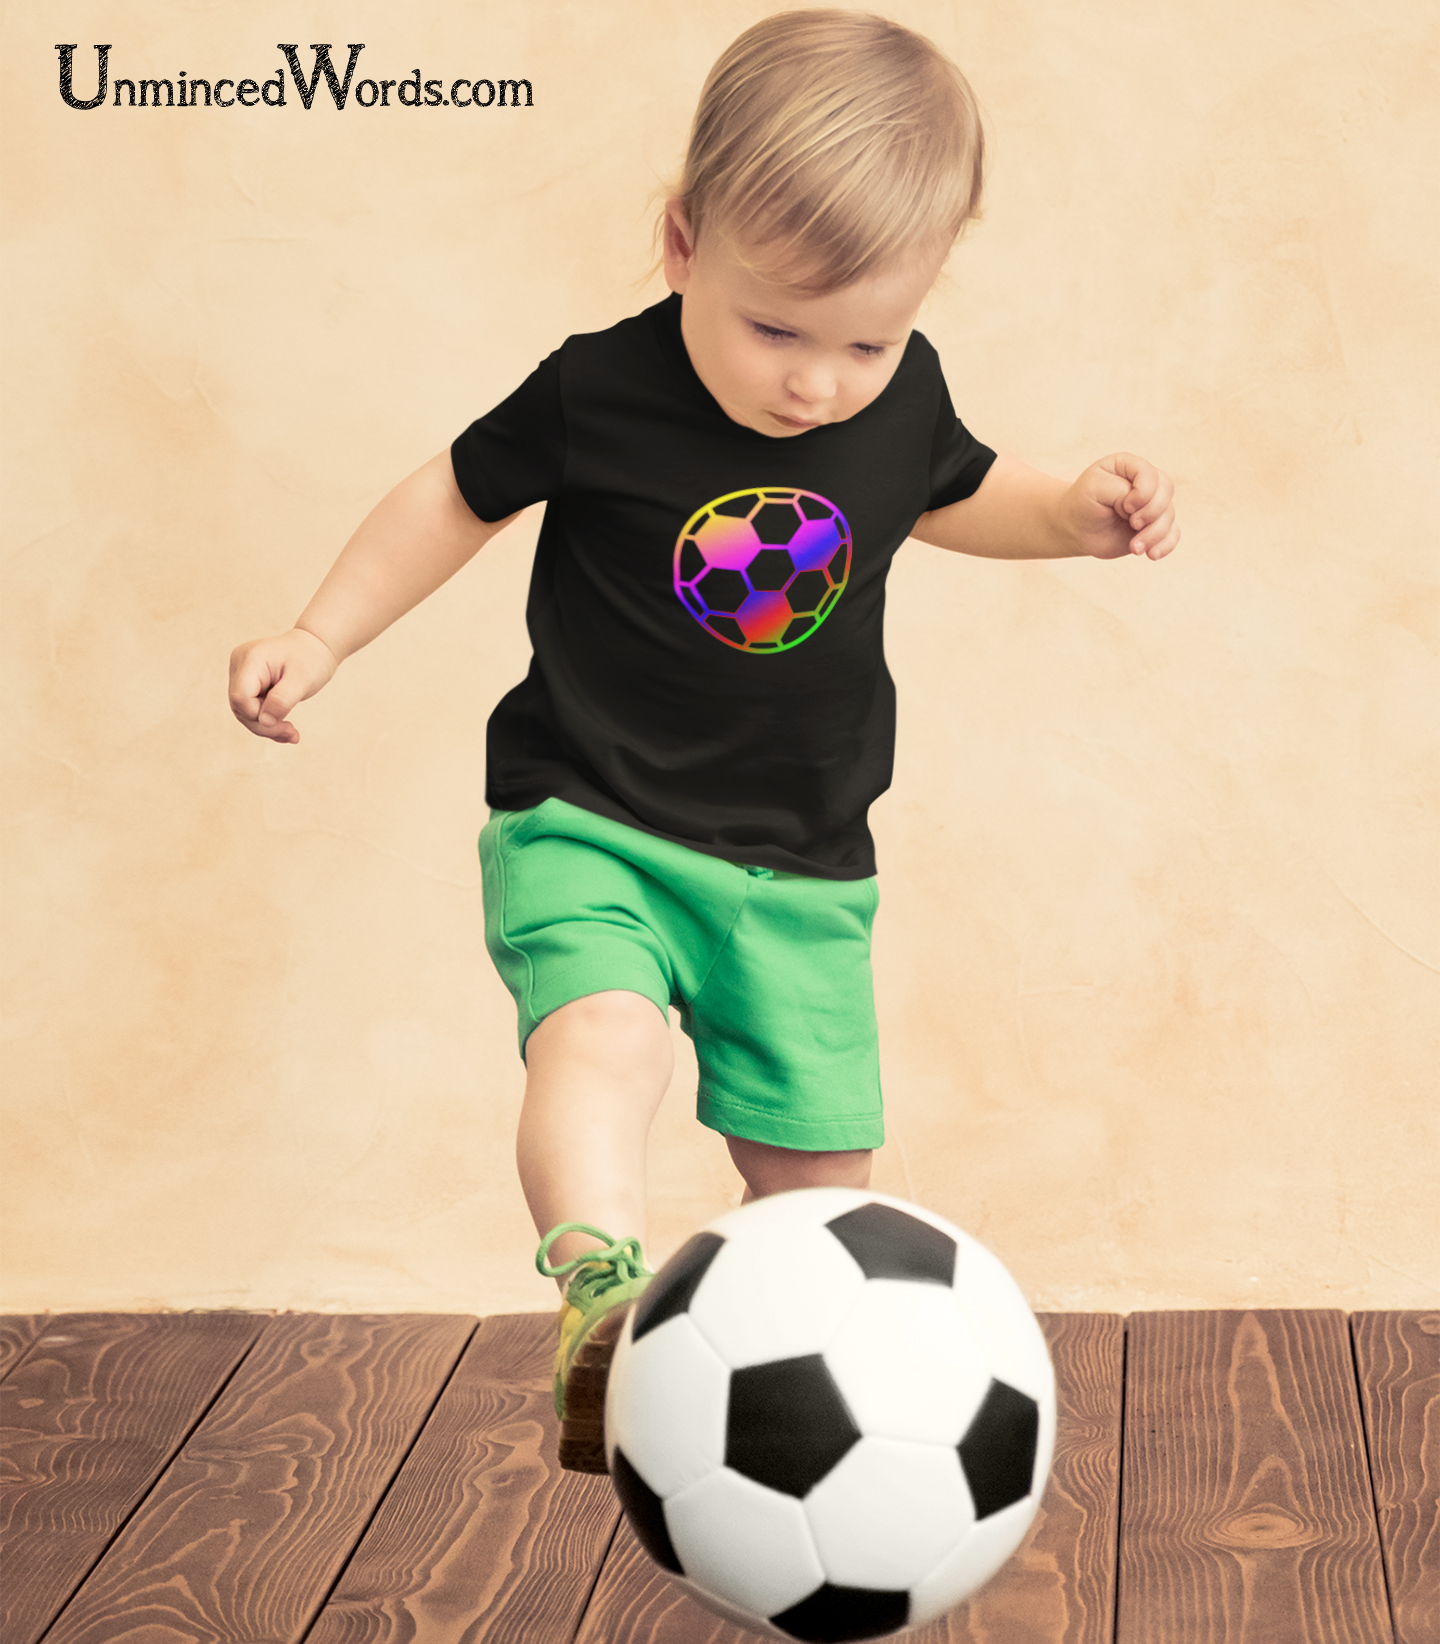 Our Soccer design kicks ass for all ages